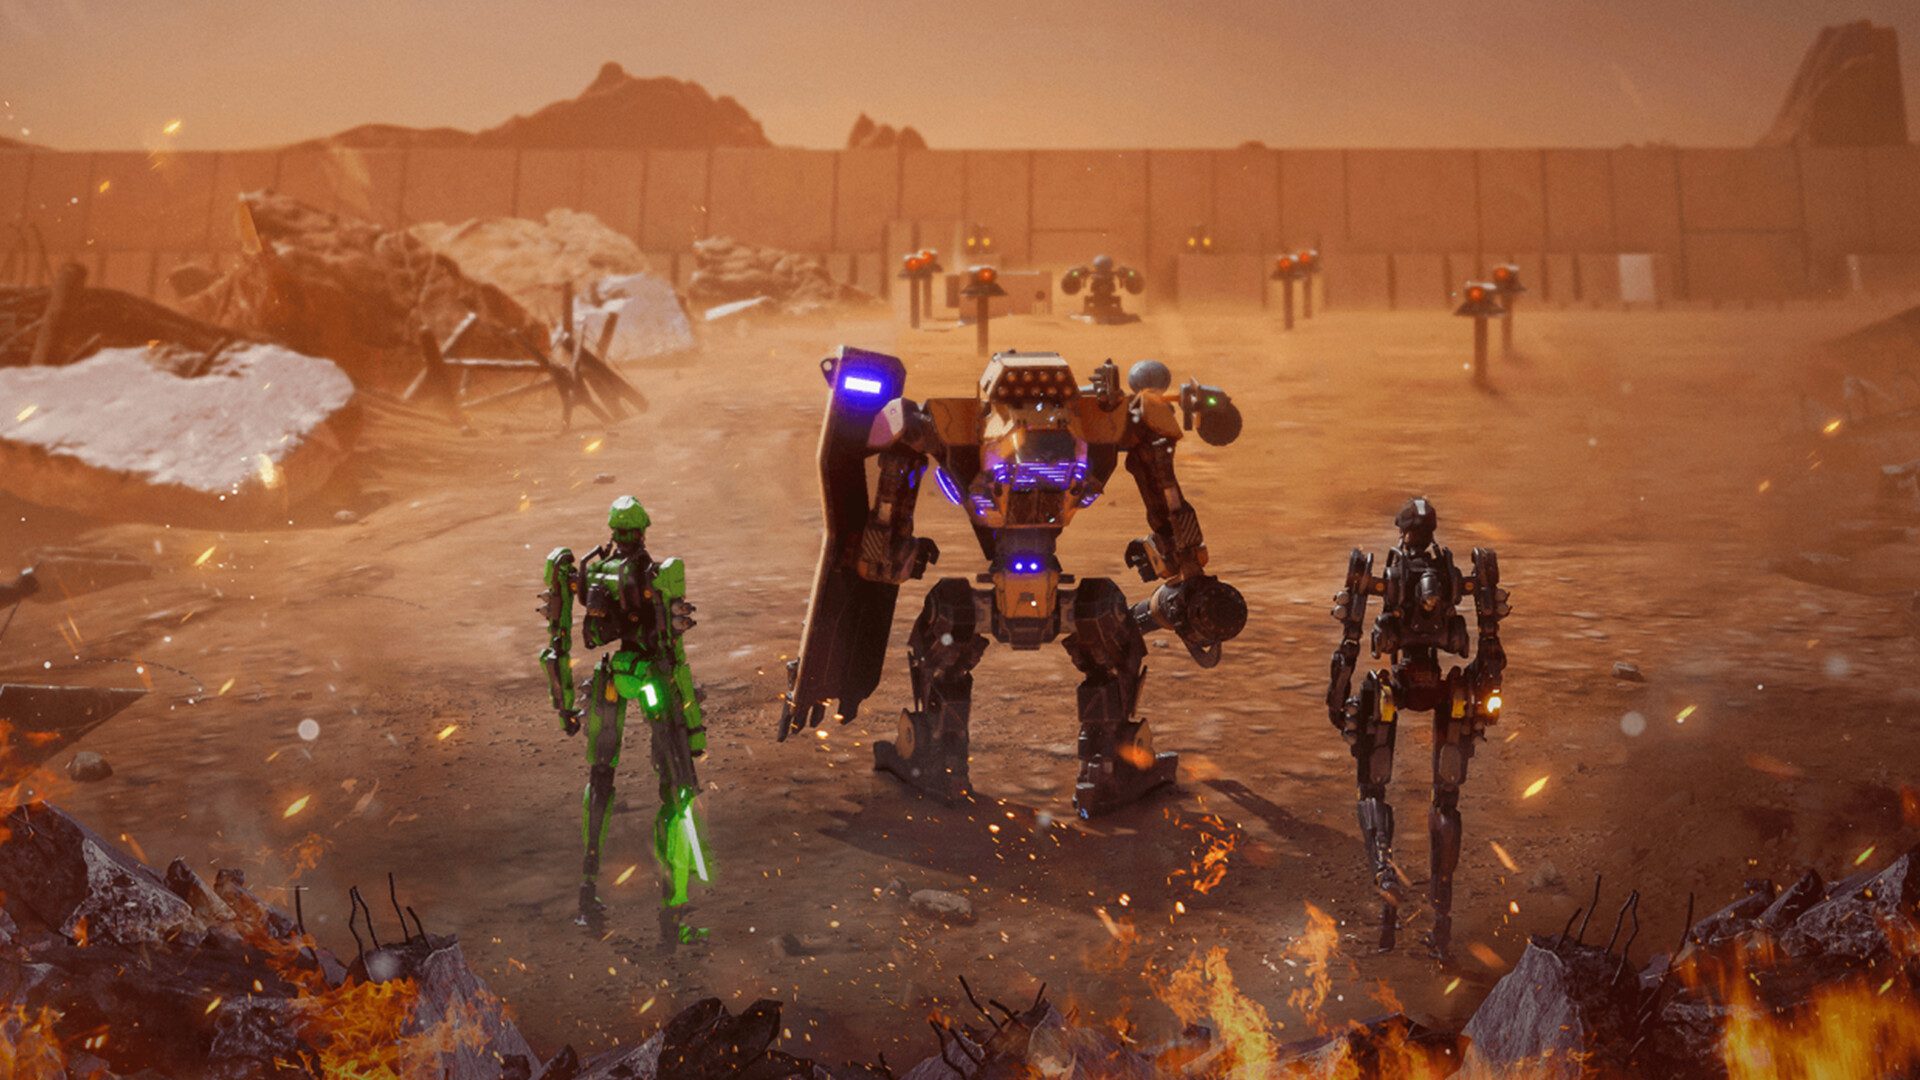 Read more about the article <strong>Space Gears: Terraform Mars and Command Mech Armies in This Innovative Sci-Fi RTS Game</strong>